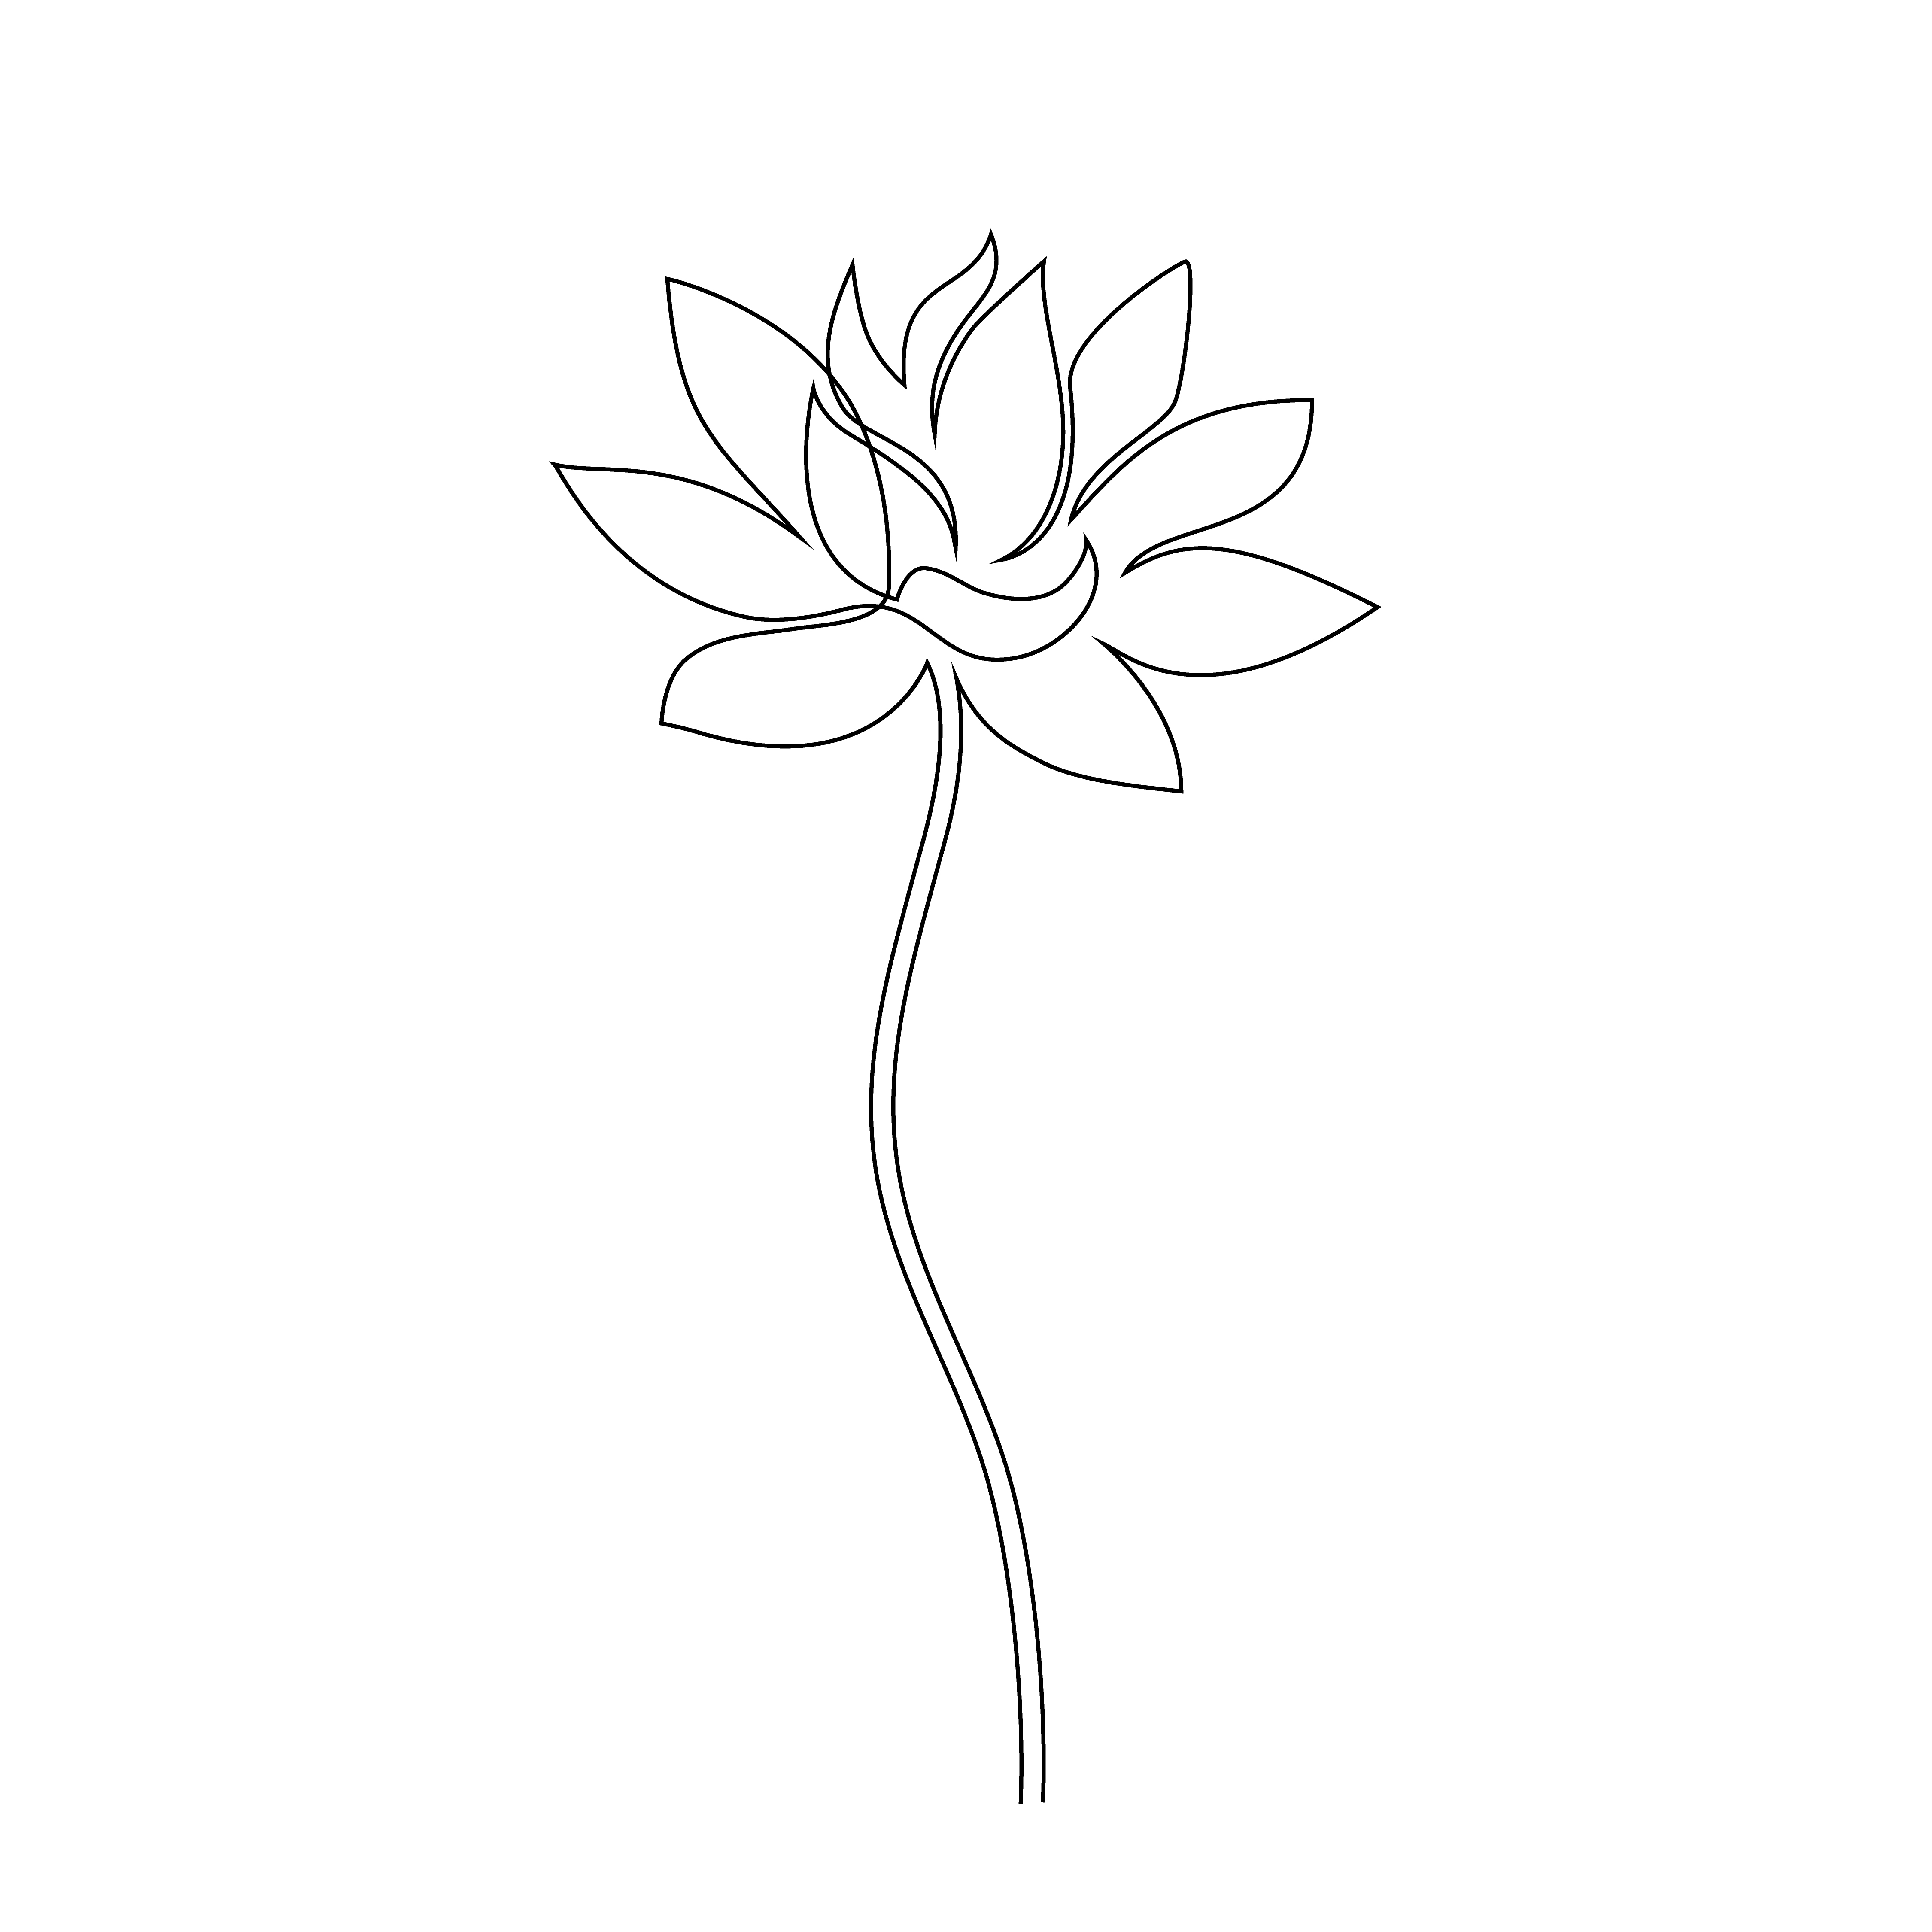 Lotus flower on white background. One line drawing style. Lotus flower on white